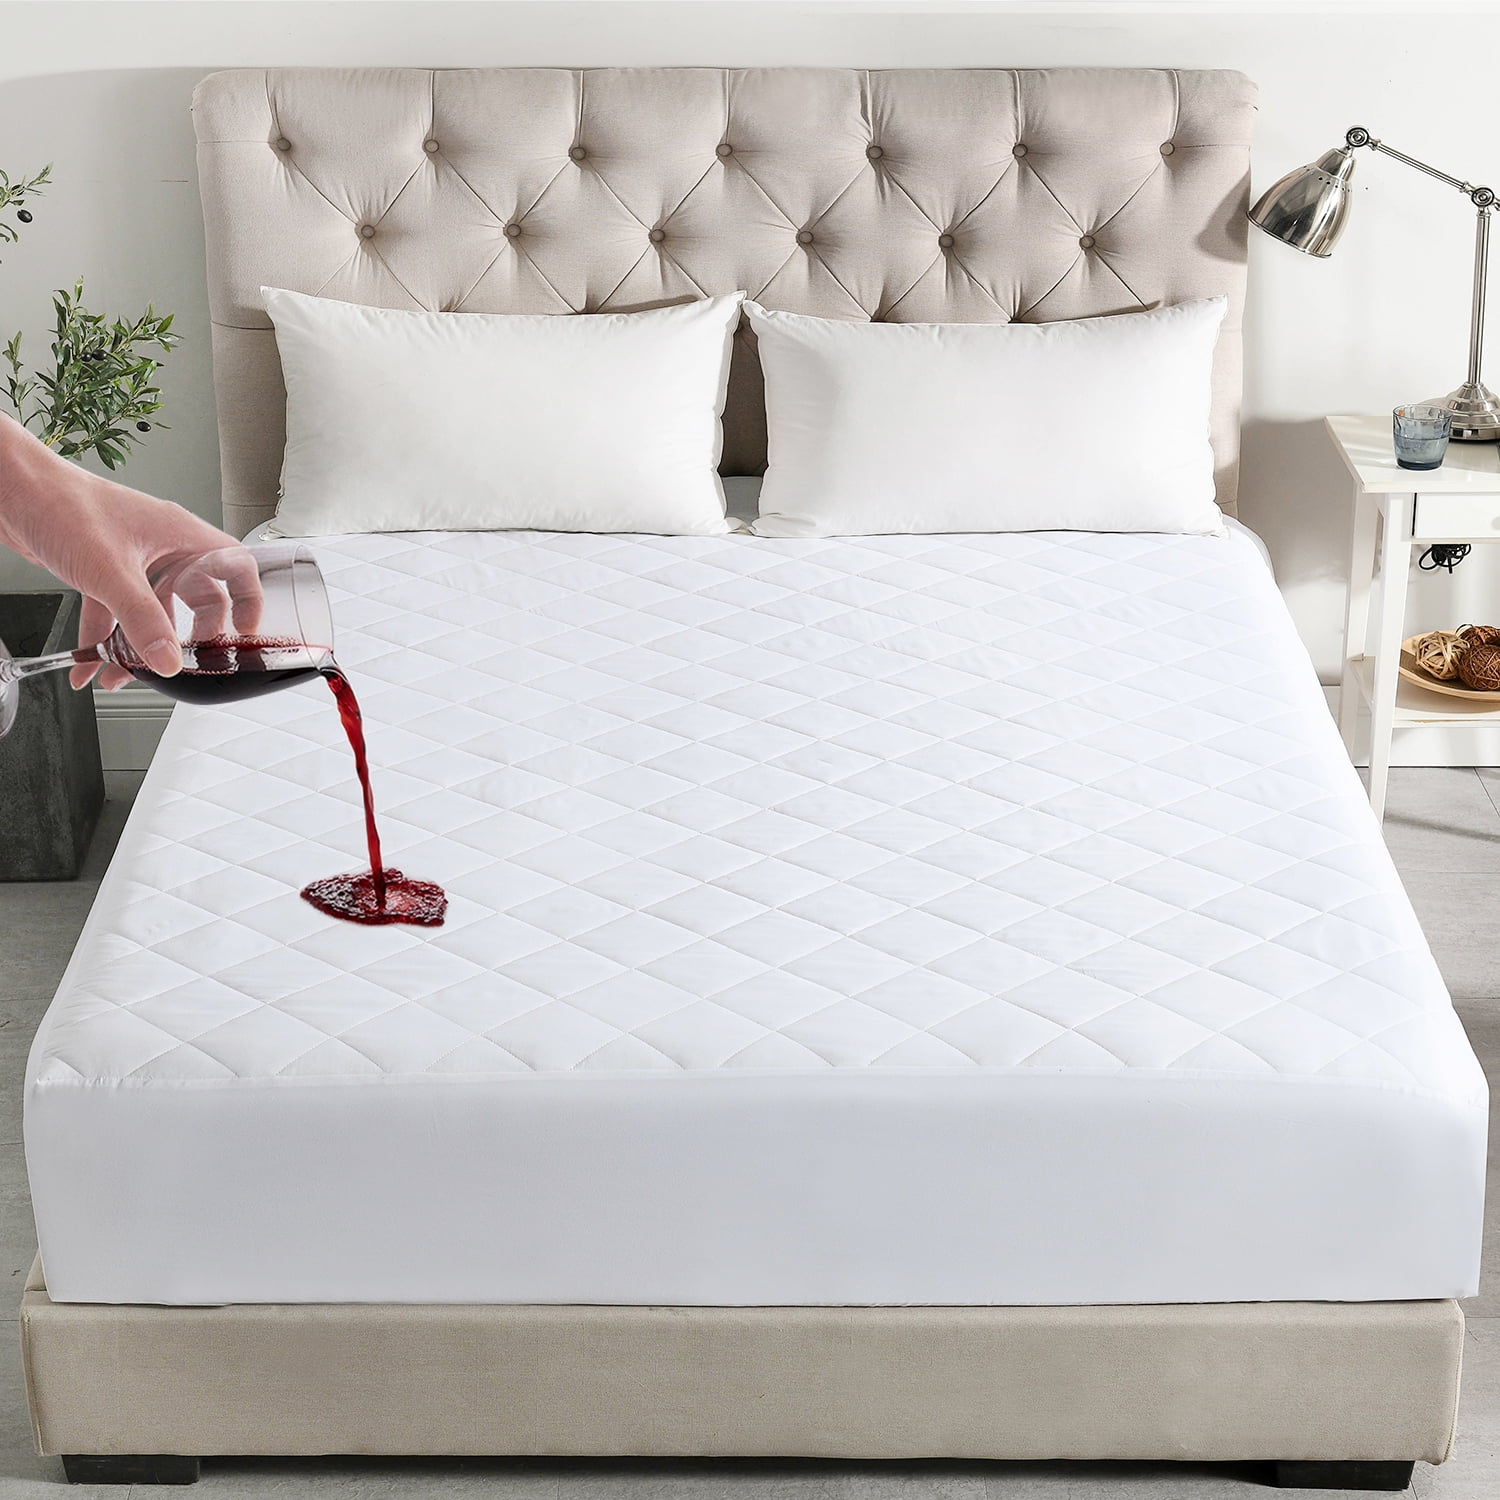 New Waterproof Quilted Matress Protector fitted sheet or Pillow protector 